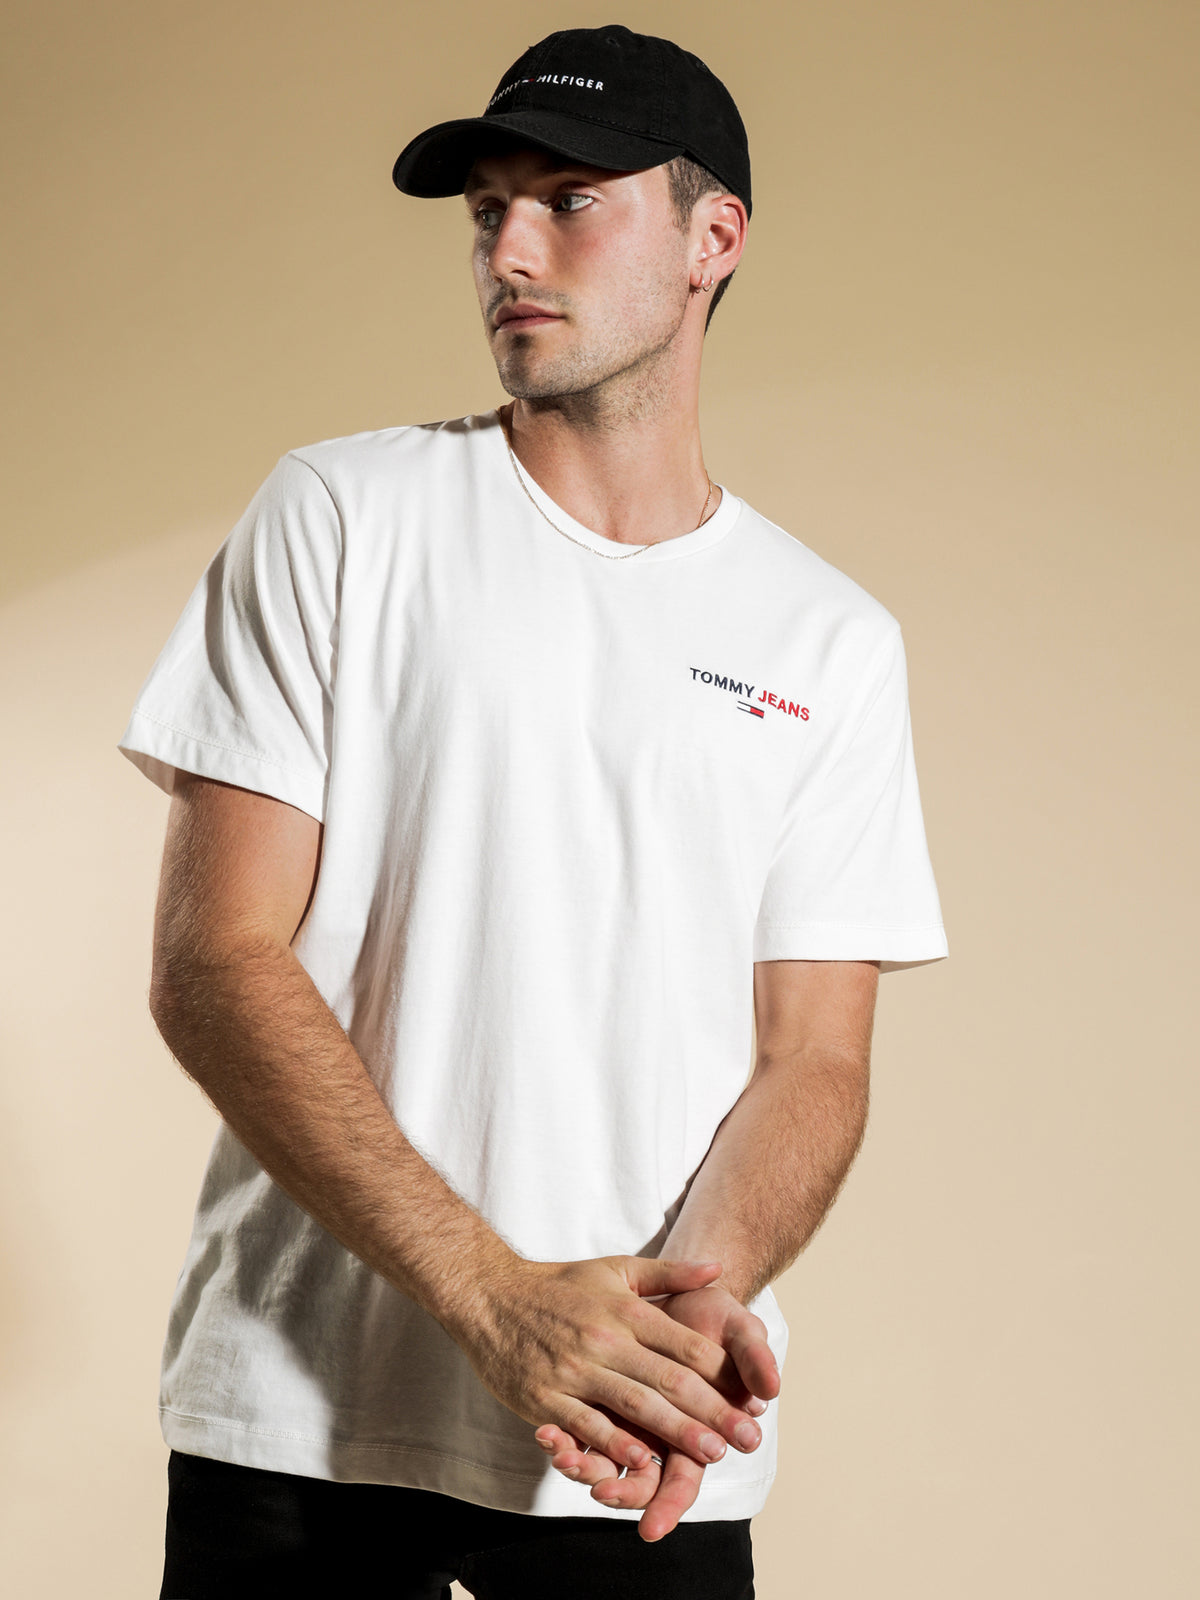 Chest Corp Logo T-Shirt in White